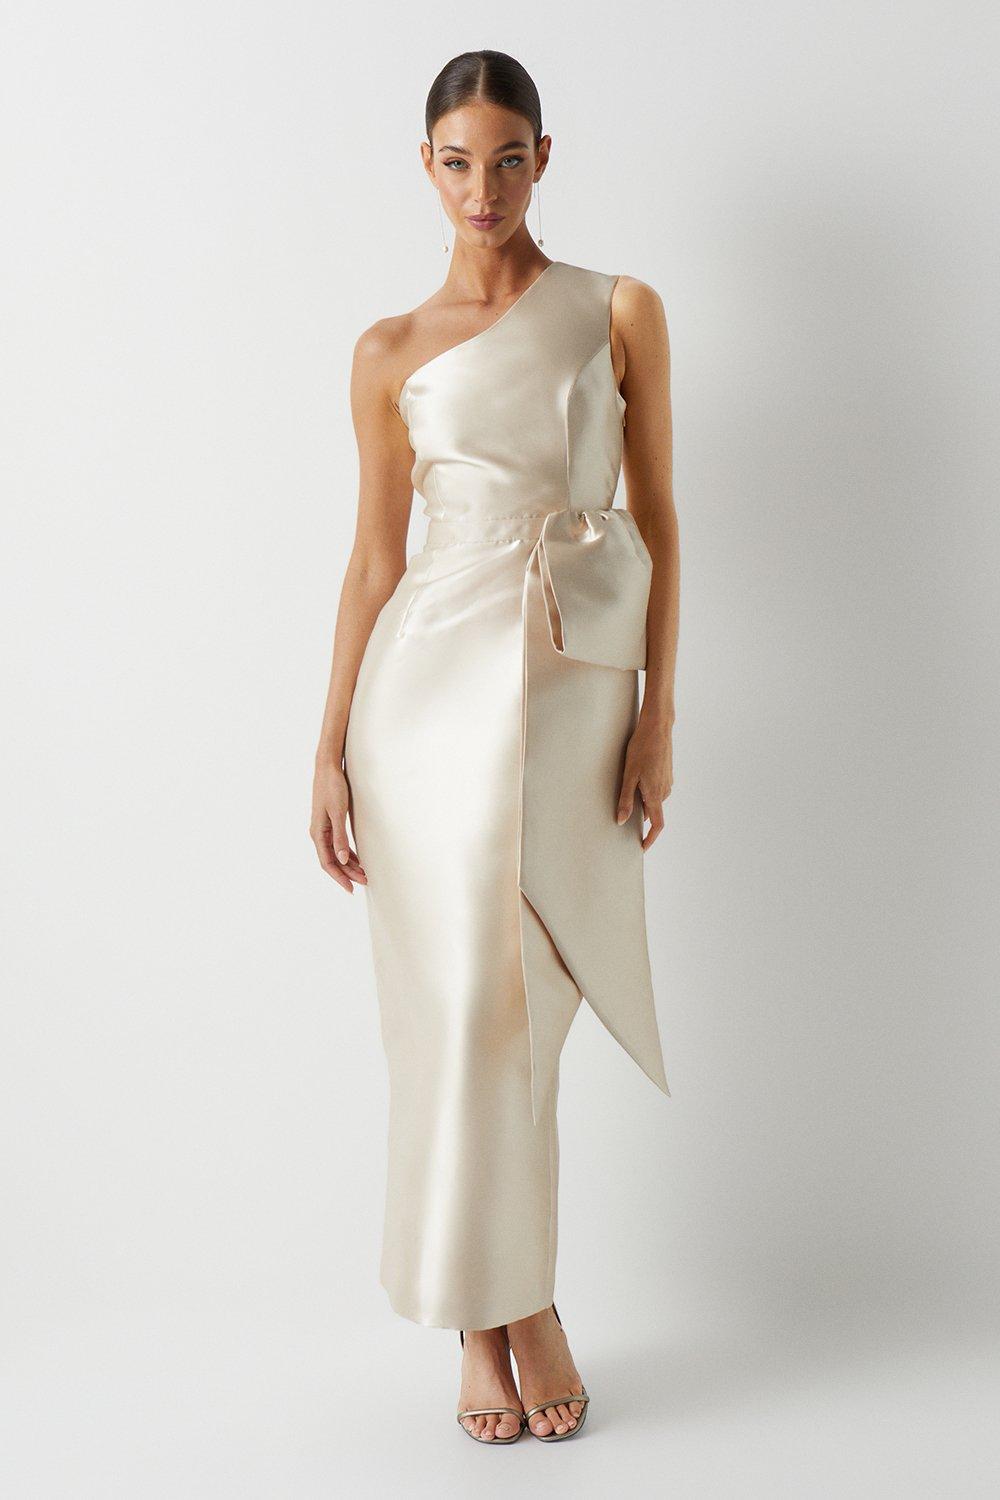 Statement Bow One Shoulder Bridesmaids Dress - Champagne